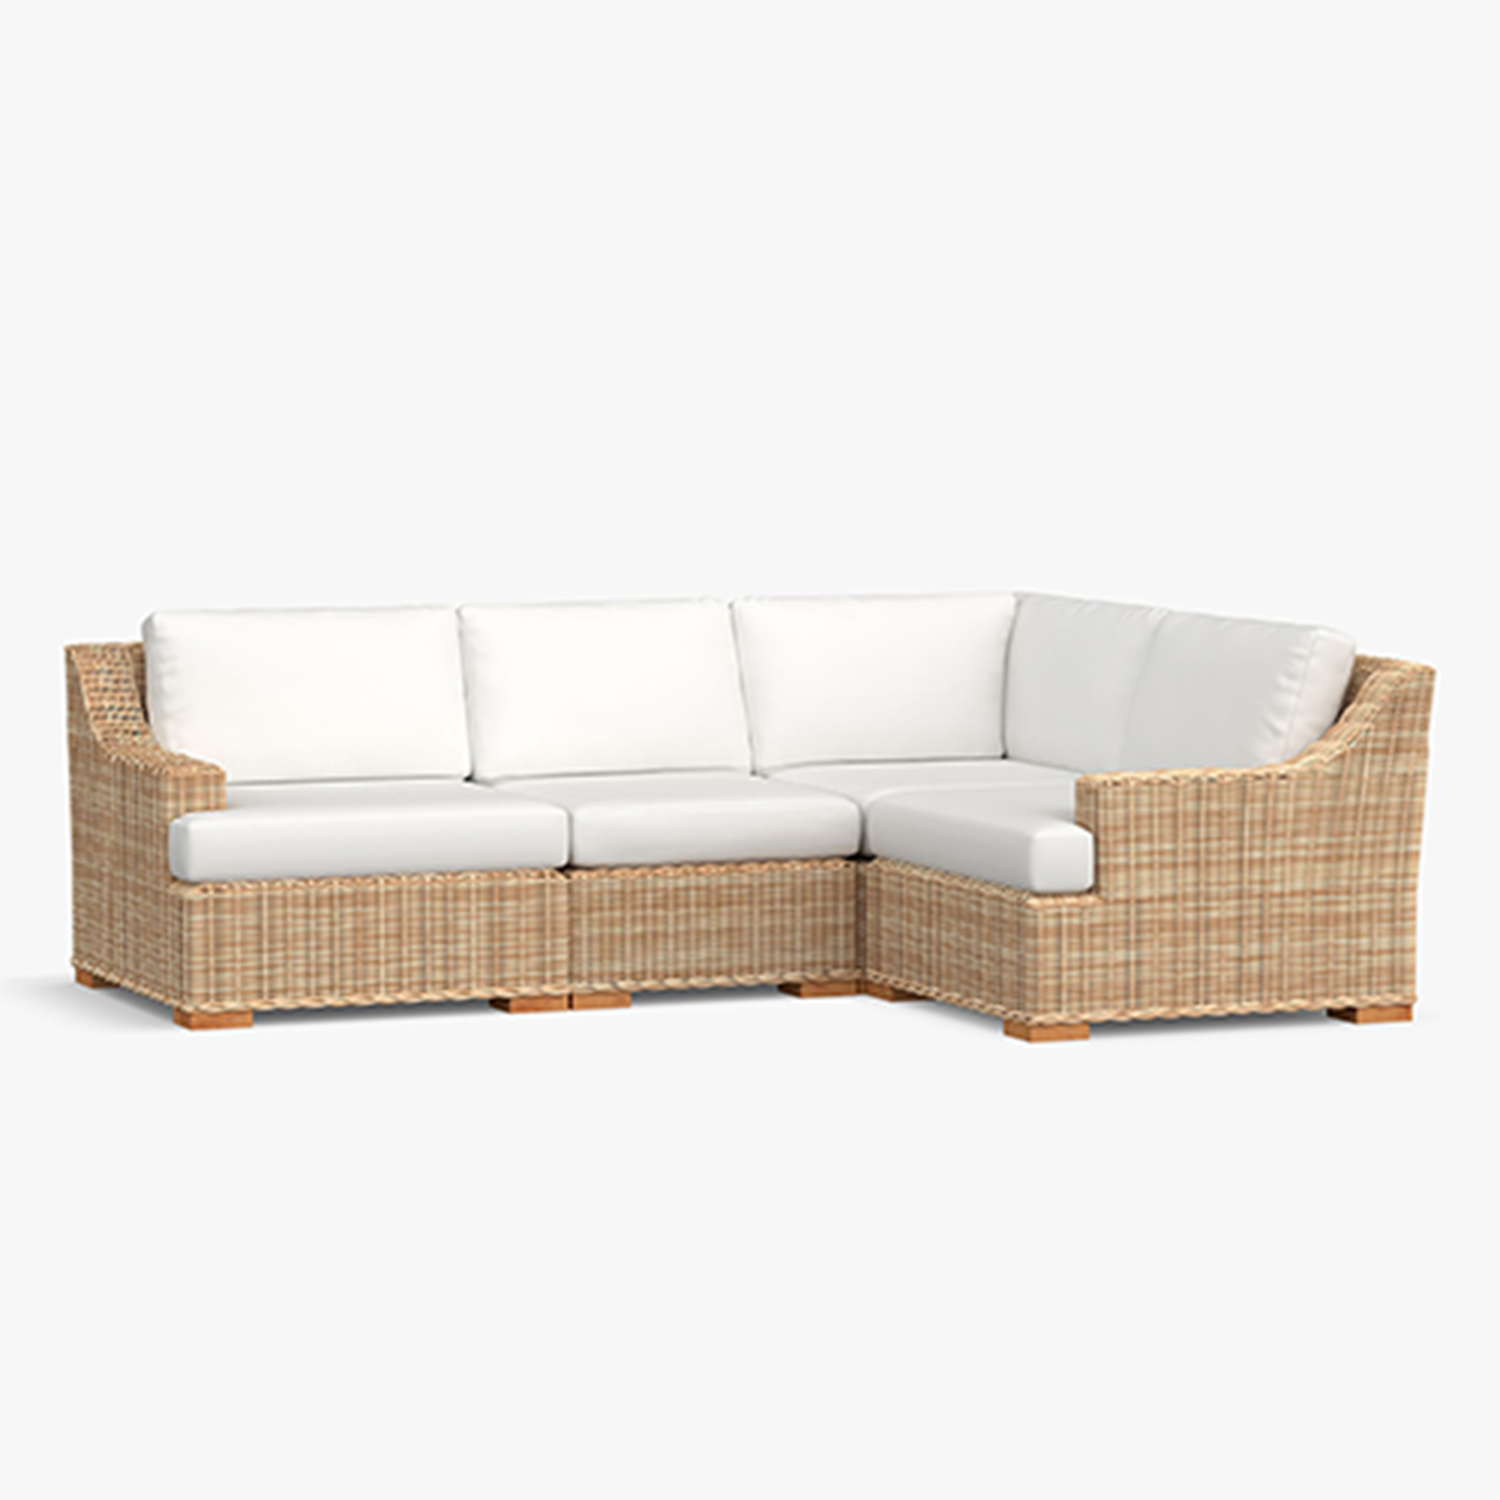 huntington-wicker-4-piece-slope-arm-outdoor-sectional-xl